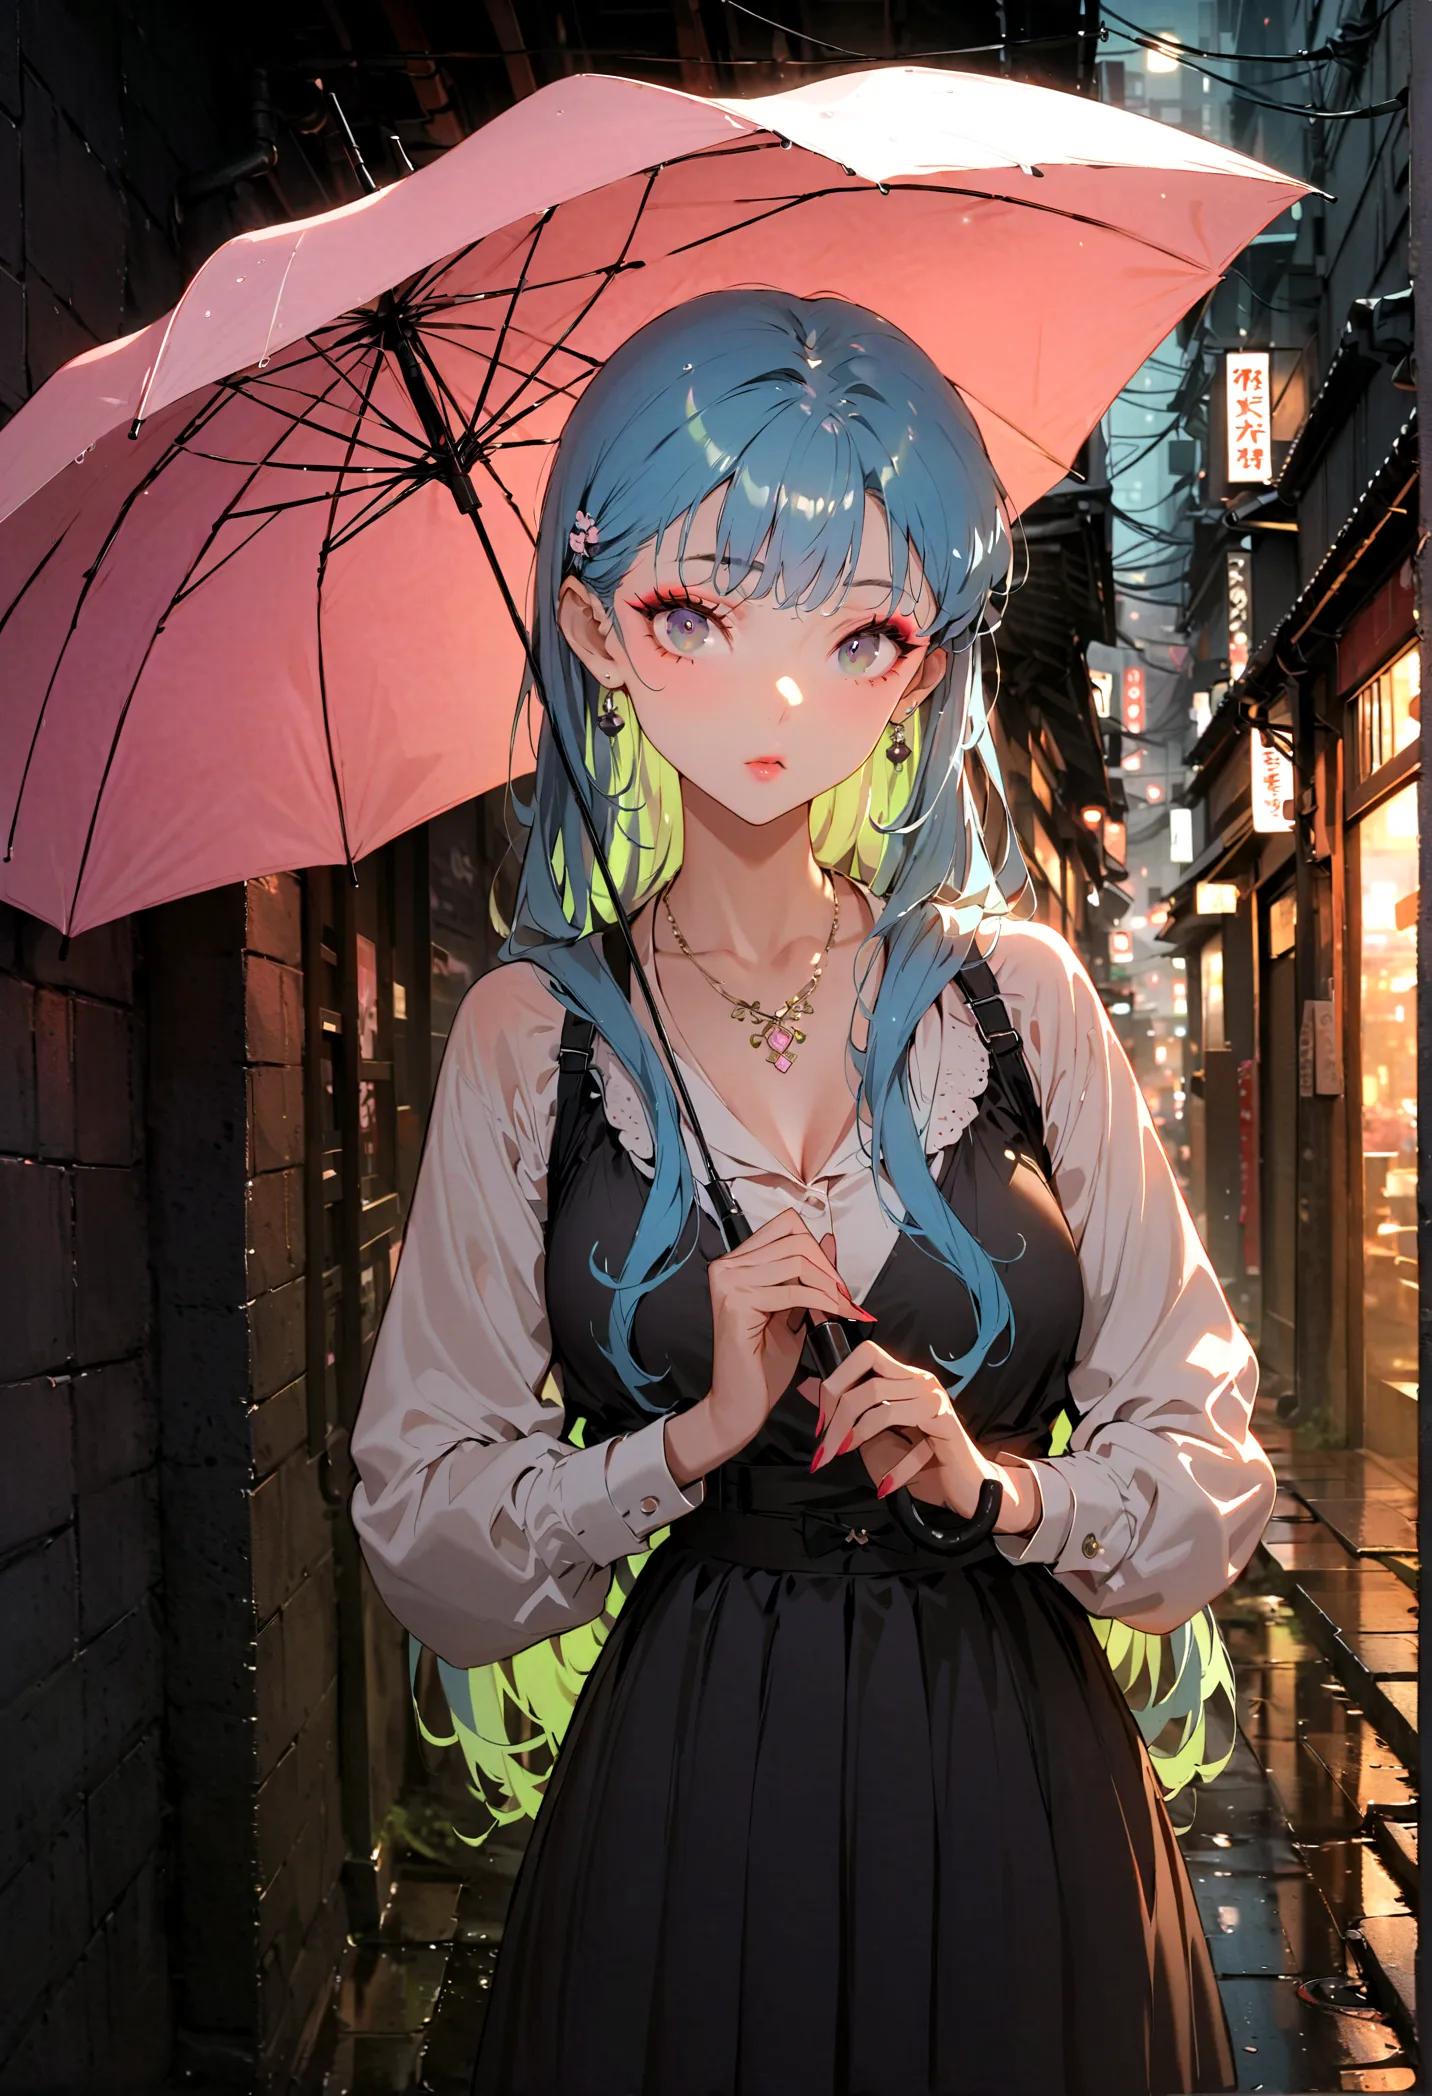 (best quality, masterpiece: 1.3), 1 Girl, Rainy Day, FOG, alley, Umbrella, Large and transparent umbrella, Looking at the audien...